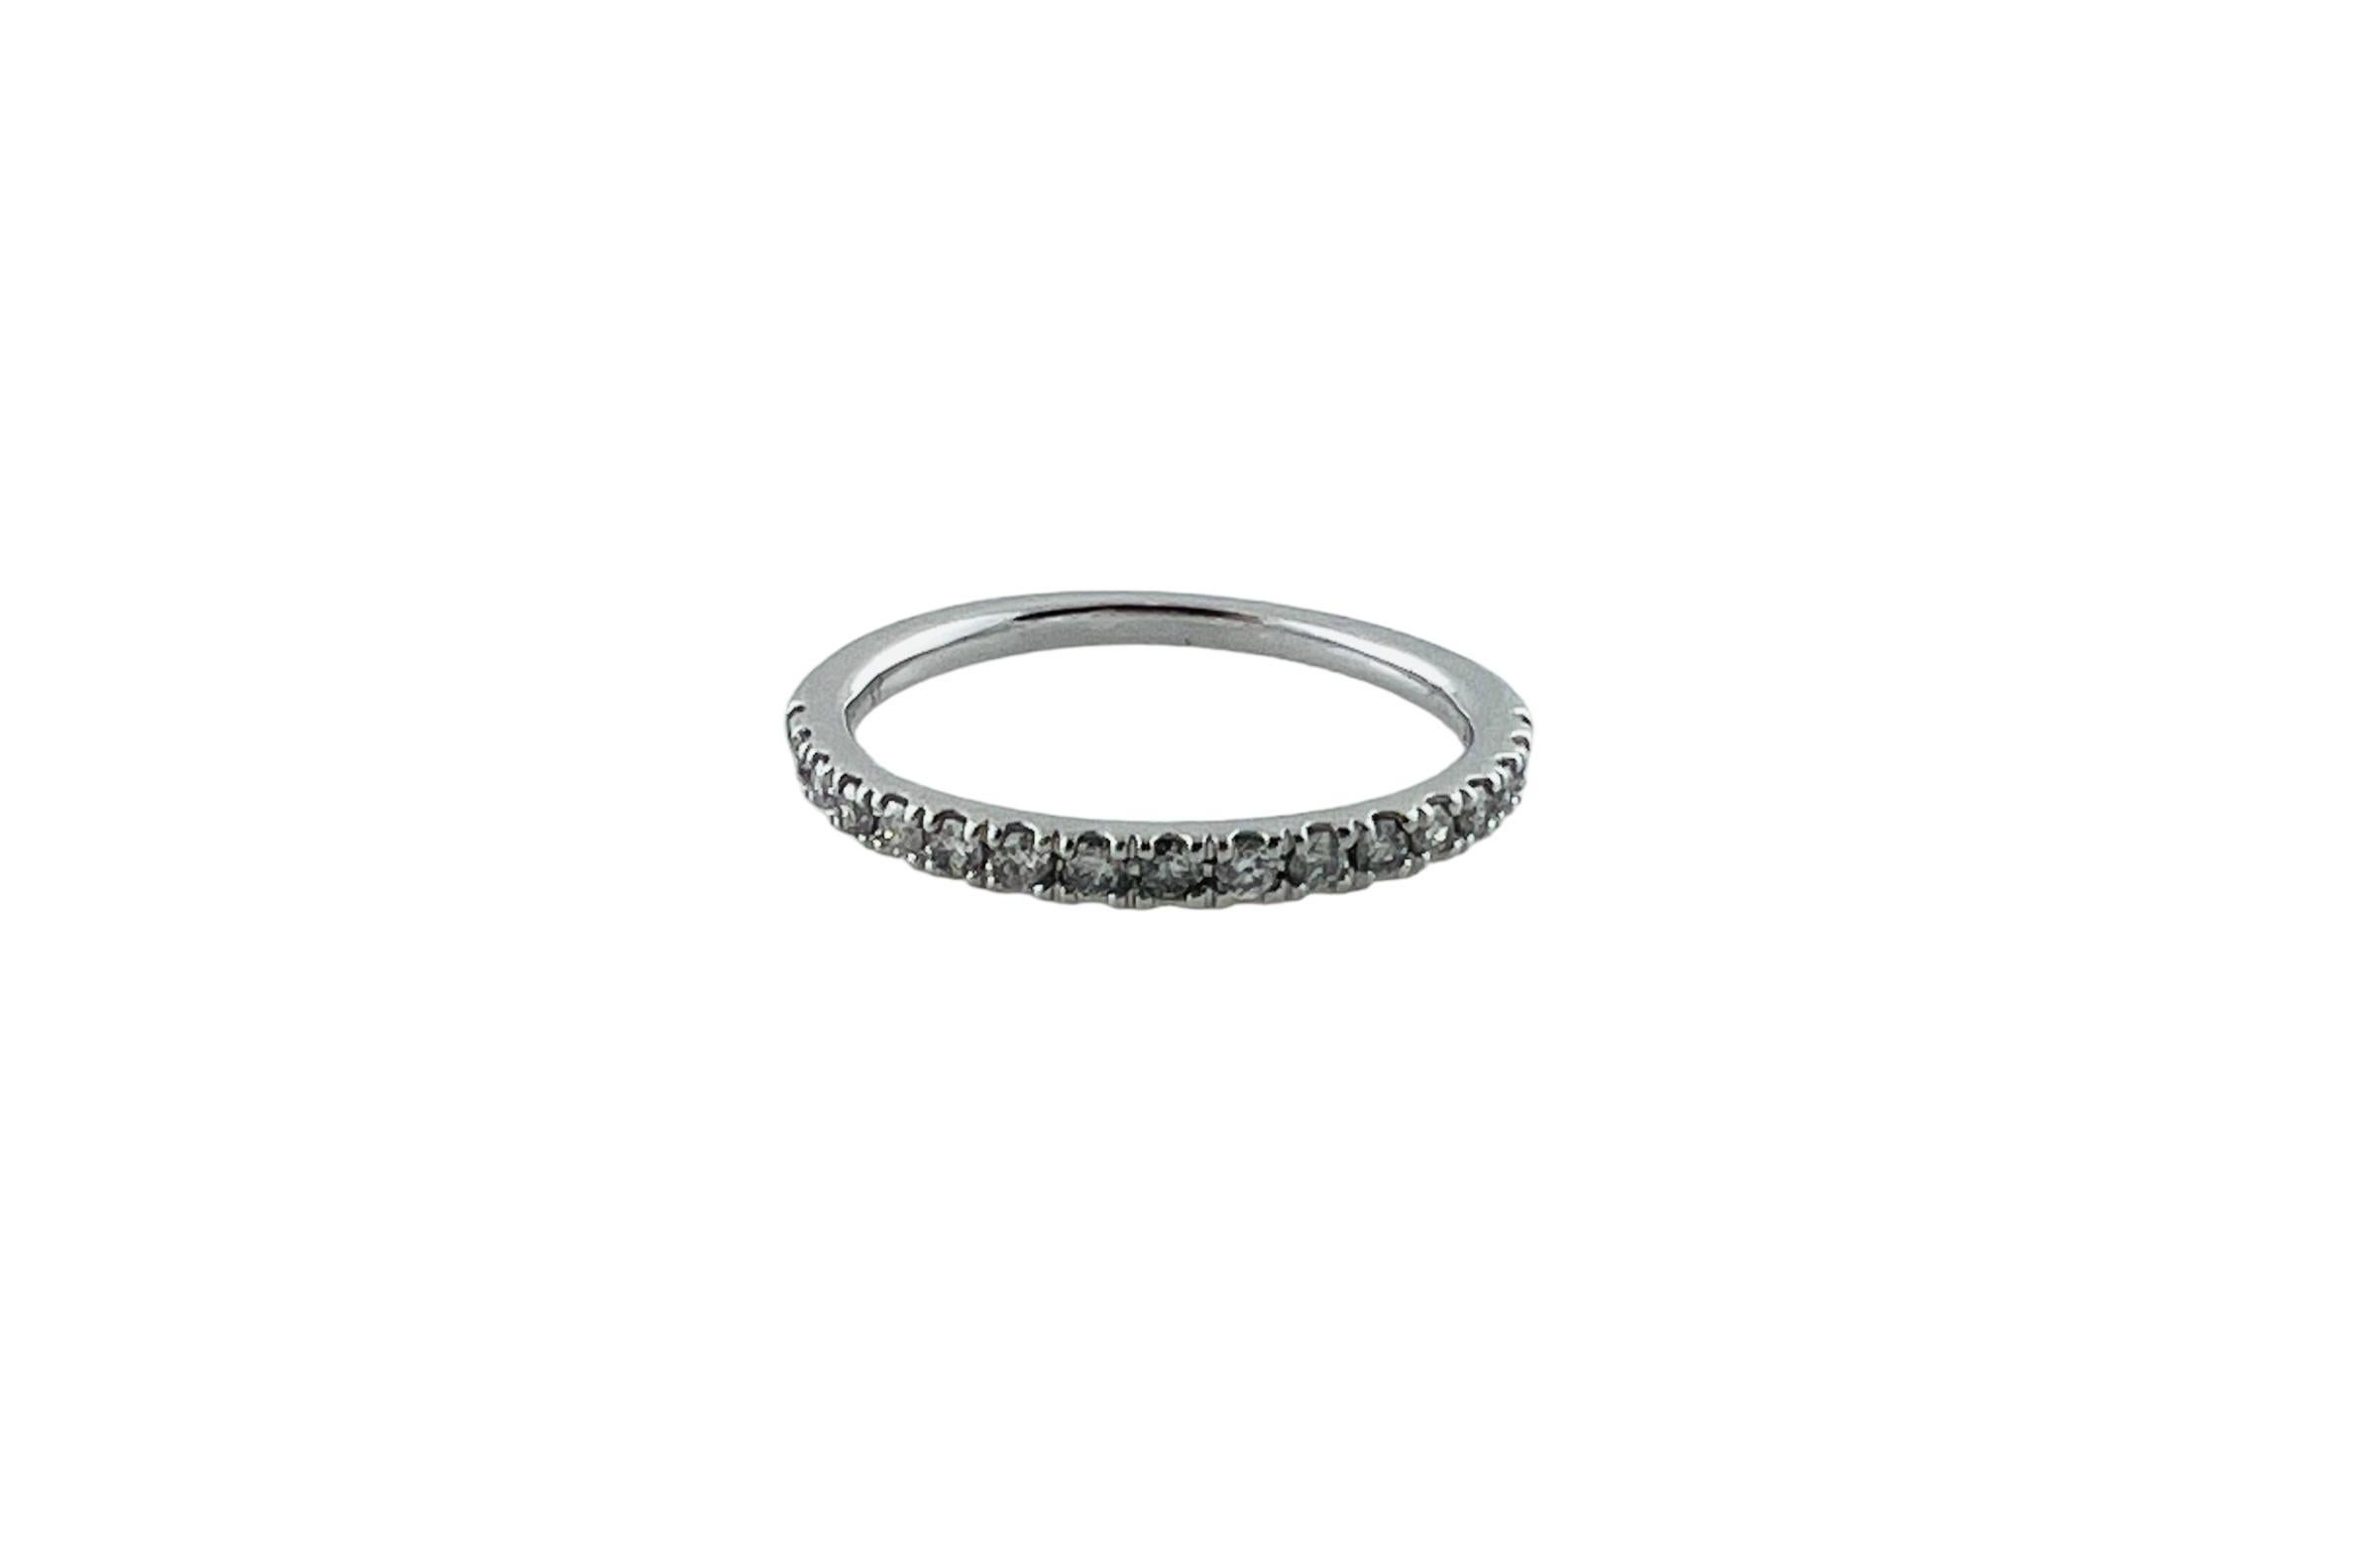 10 Karat White Gold Diamond Band Ring size 5.5-

This sparkling band features 17 round brilliant cut diamonds set in classic 10K white gold.  Width:  2 mm.  Shank:  1.6 mm.

Approximate total diamond weight:  .20 ct.

Diamond clarity: